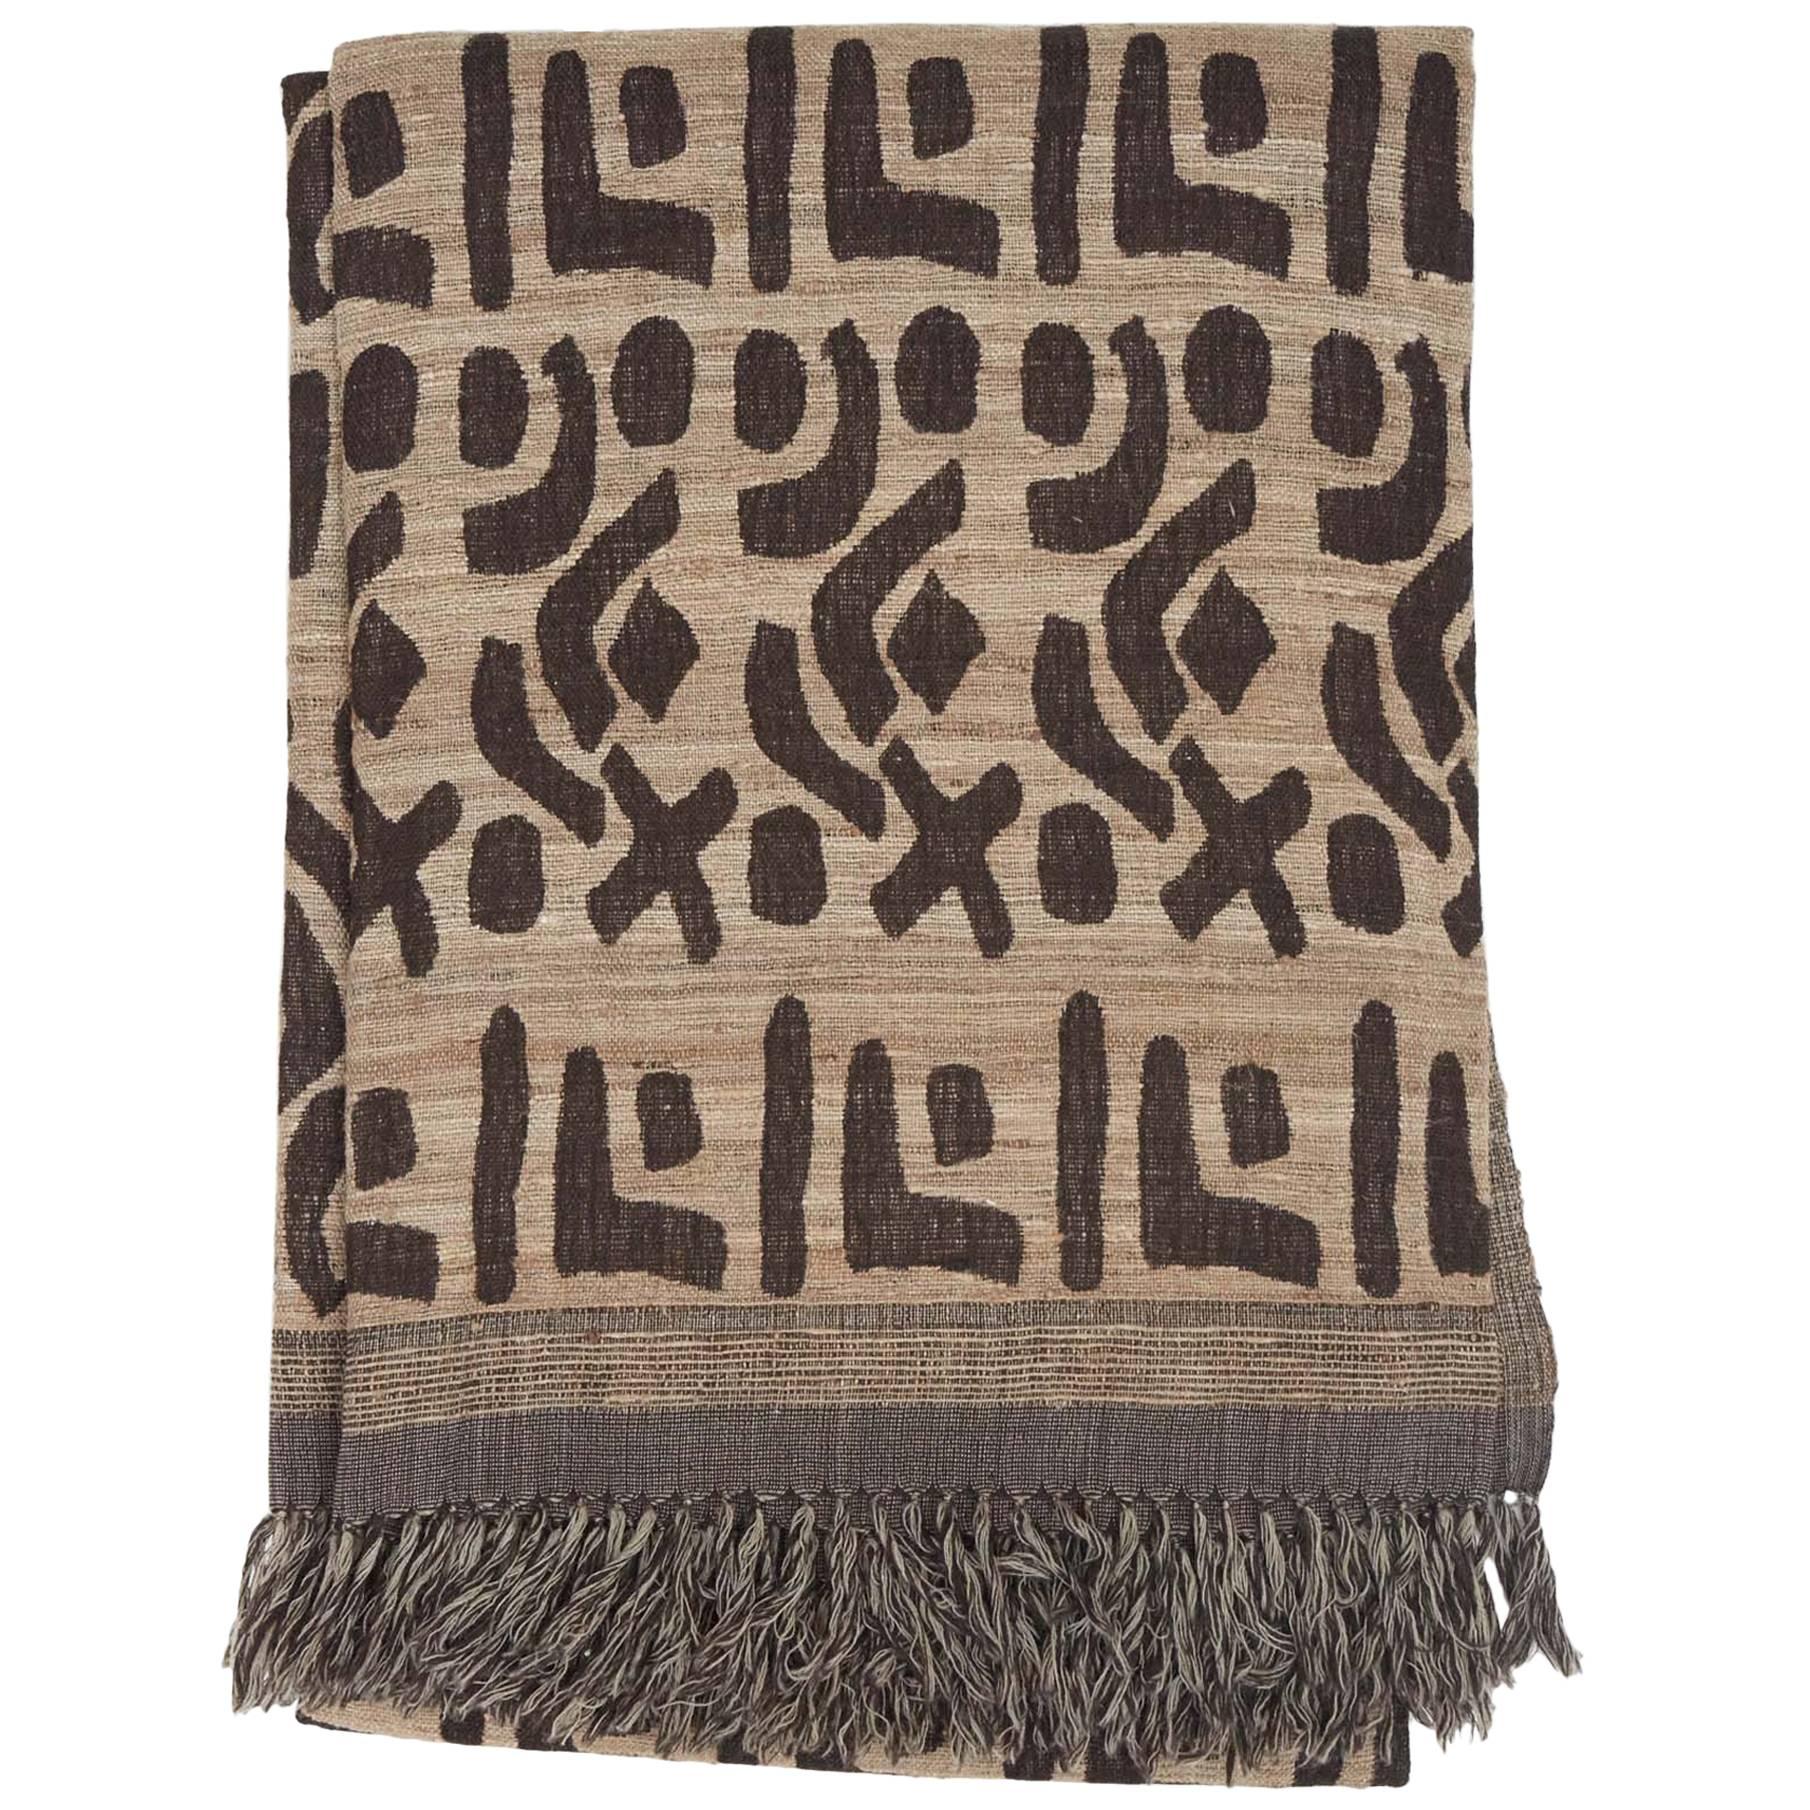 Indian Hand Woven Throw.  Oatmeal and Brown.  Kuba Design.  Wool and Raw Silk.  For Sale